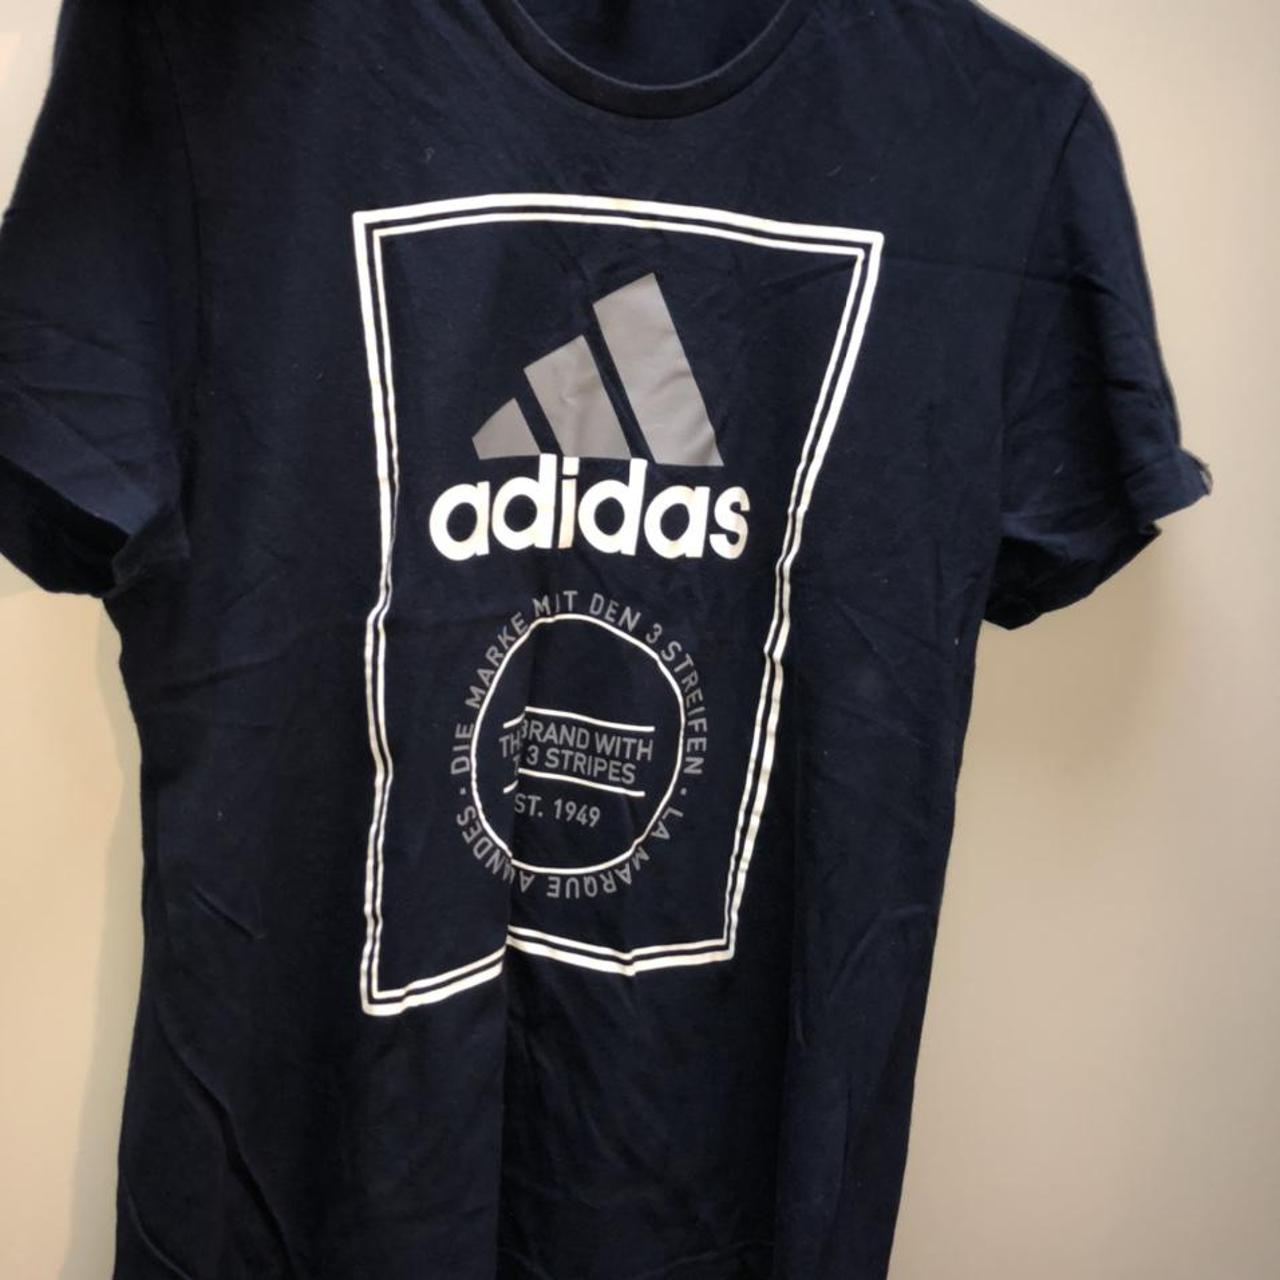 Adidas T-shirt Size M Logo is NOT cracked Very... - Depop